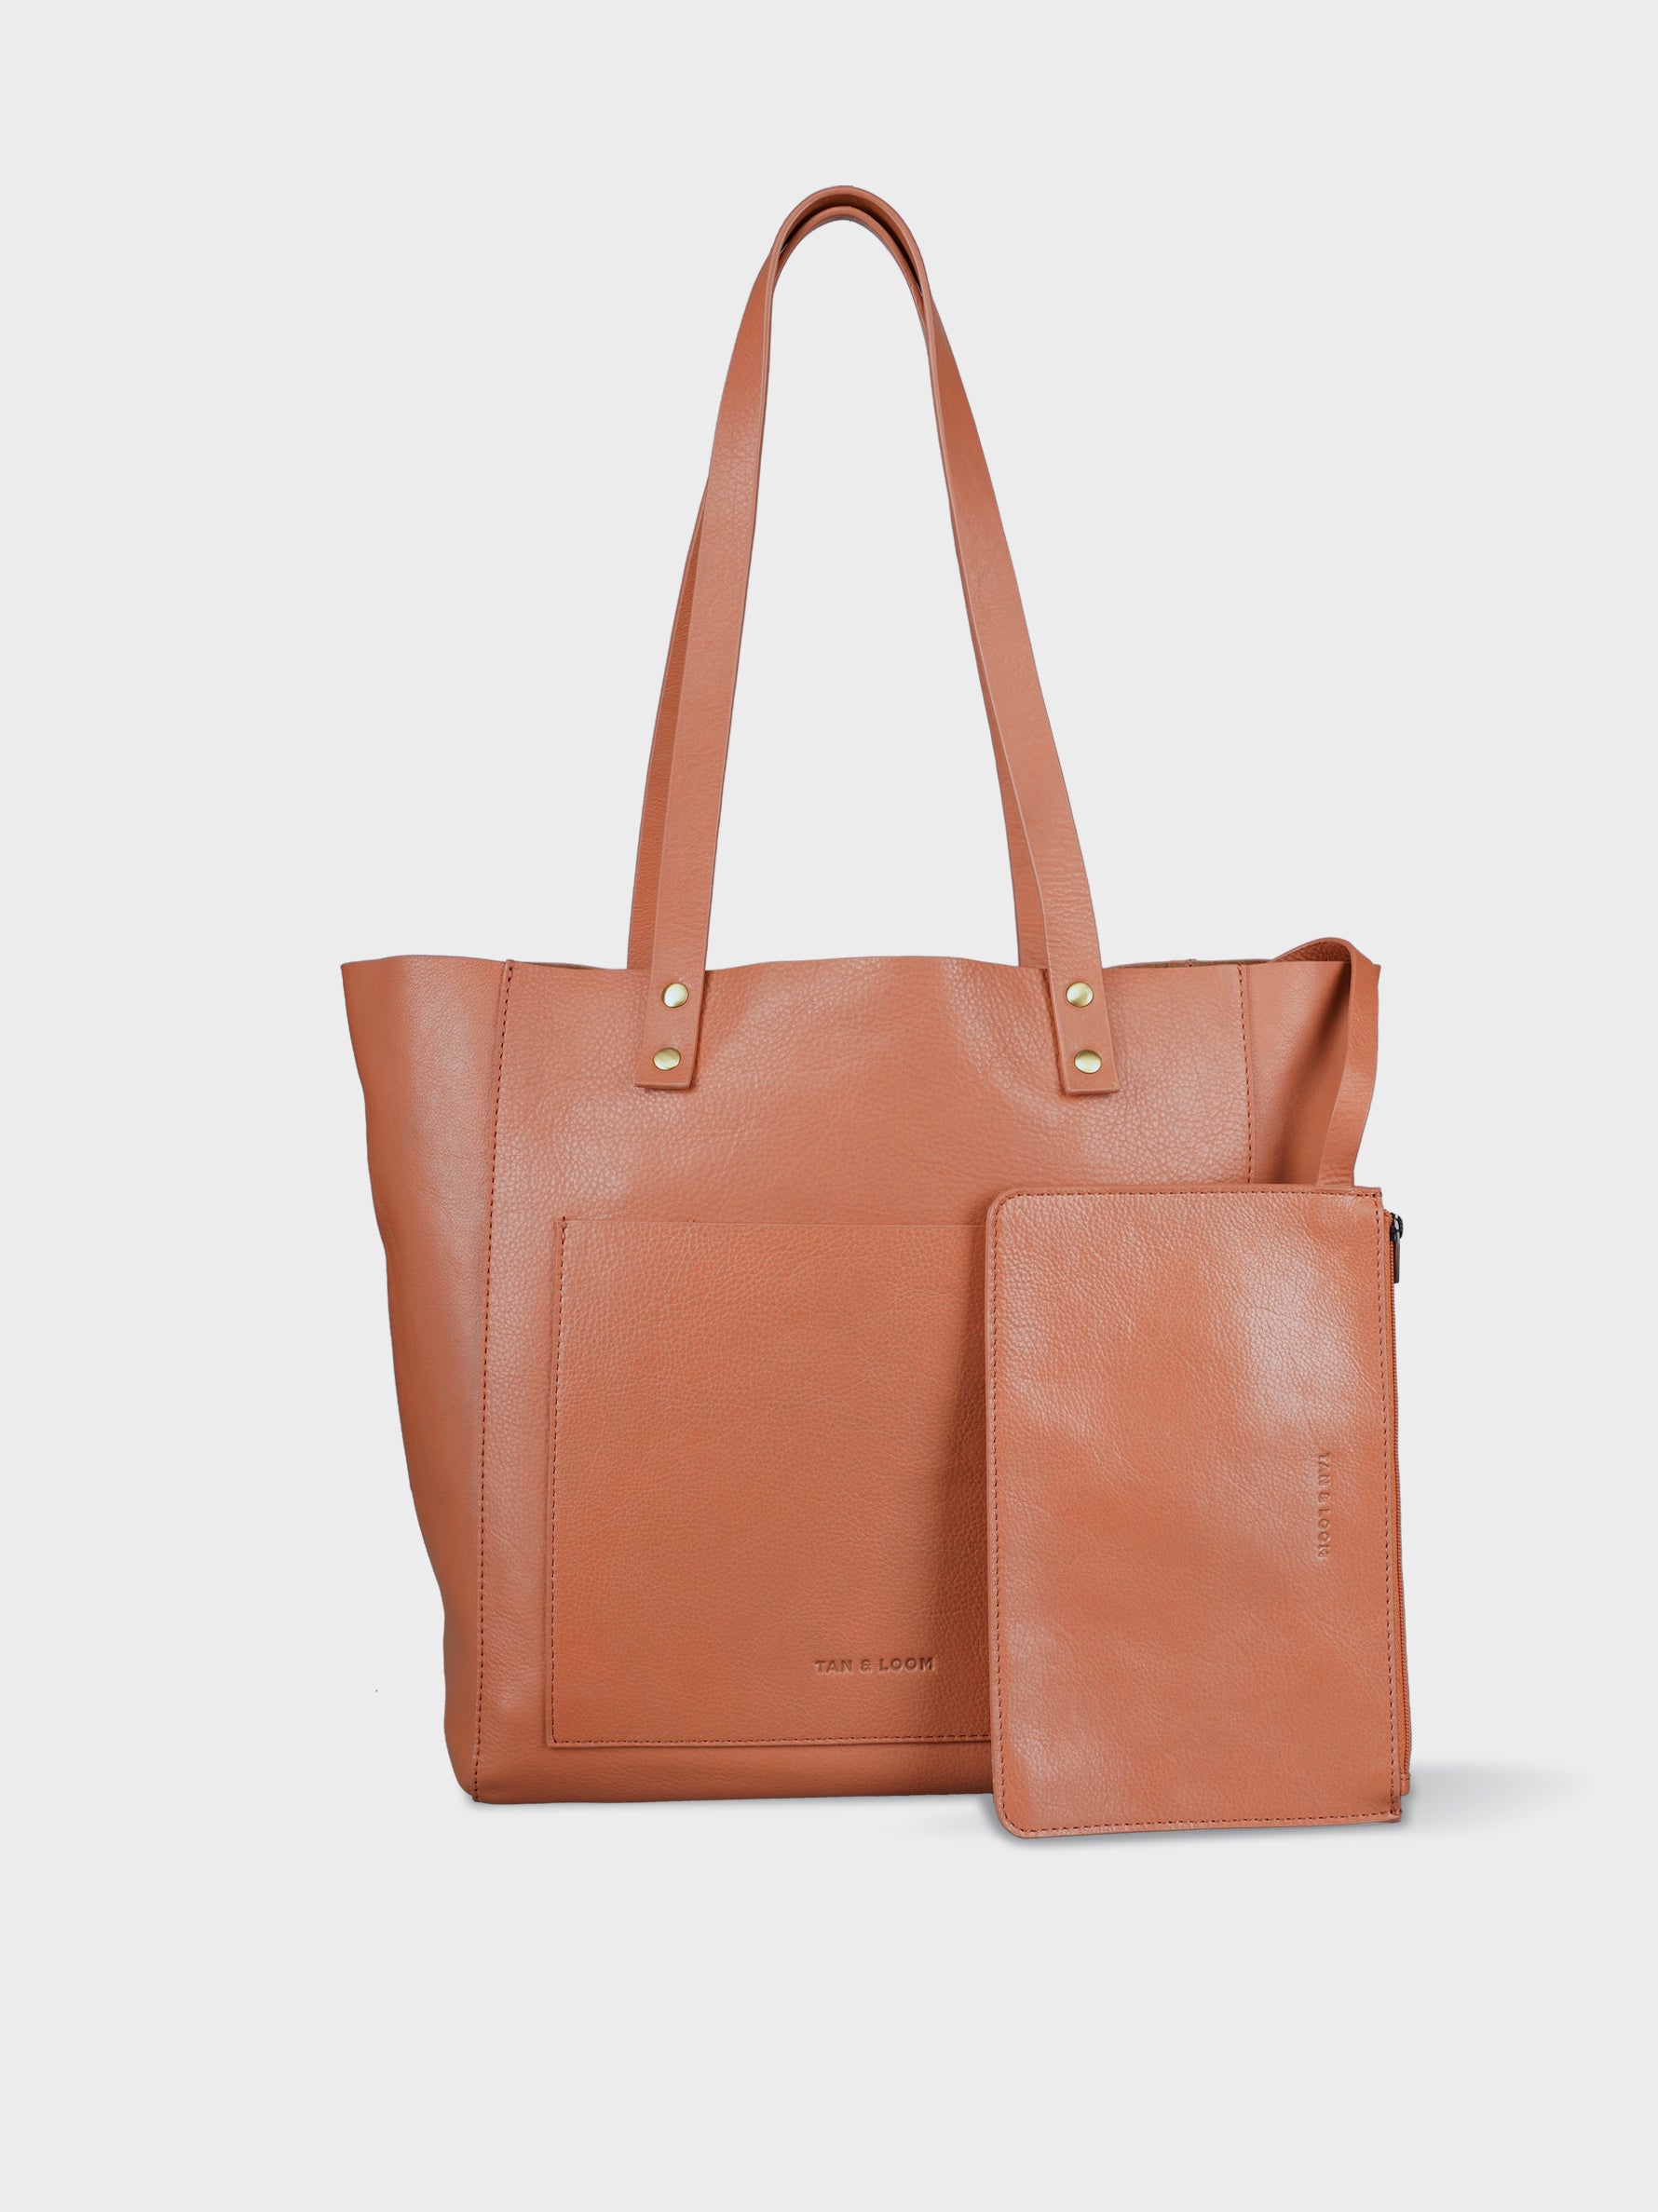 Handcrafted Genuine Vegetable Tanned Leather Old Fashioned Tote Regular Dusty Peach  for Women Tan & Loom